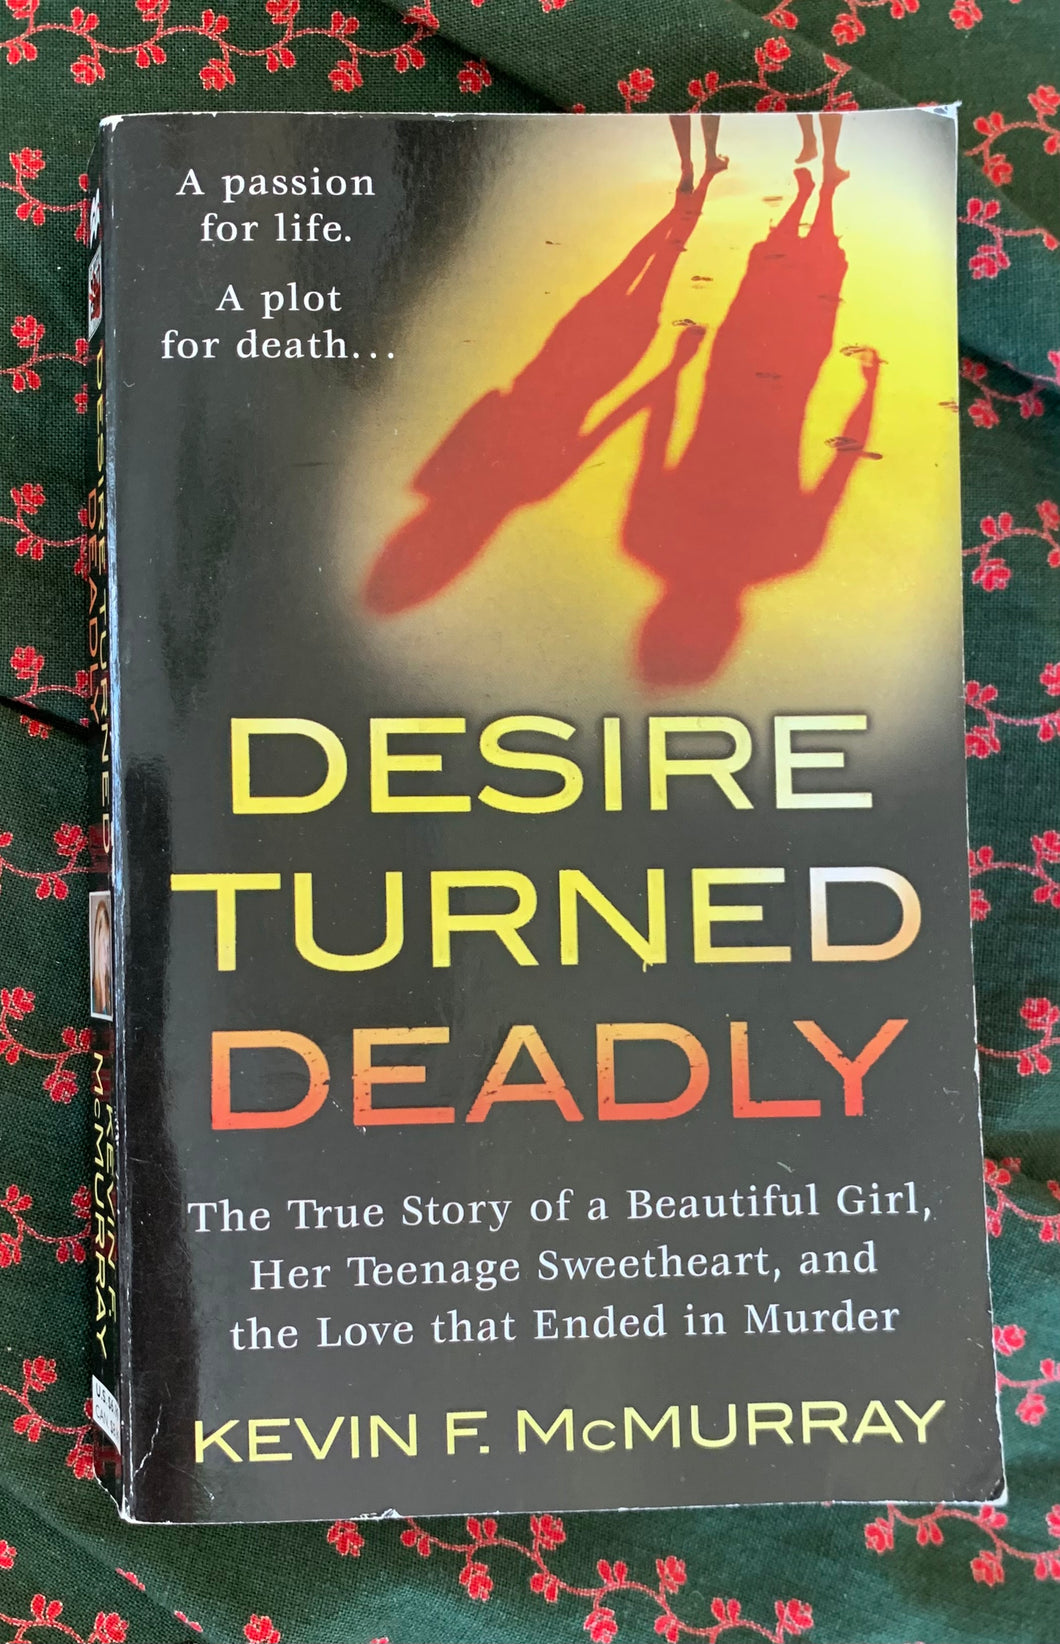 Desire Turned Deadly: The True Story of a Beautiful Girl, Her Teenage Sweetheart, and the Love that Ended in Murder